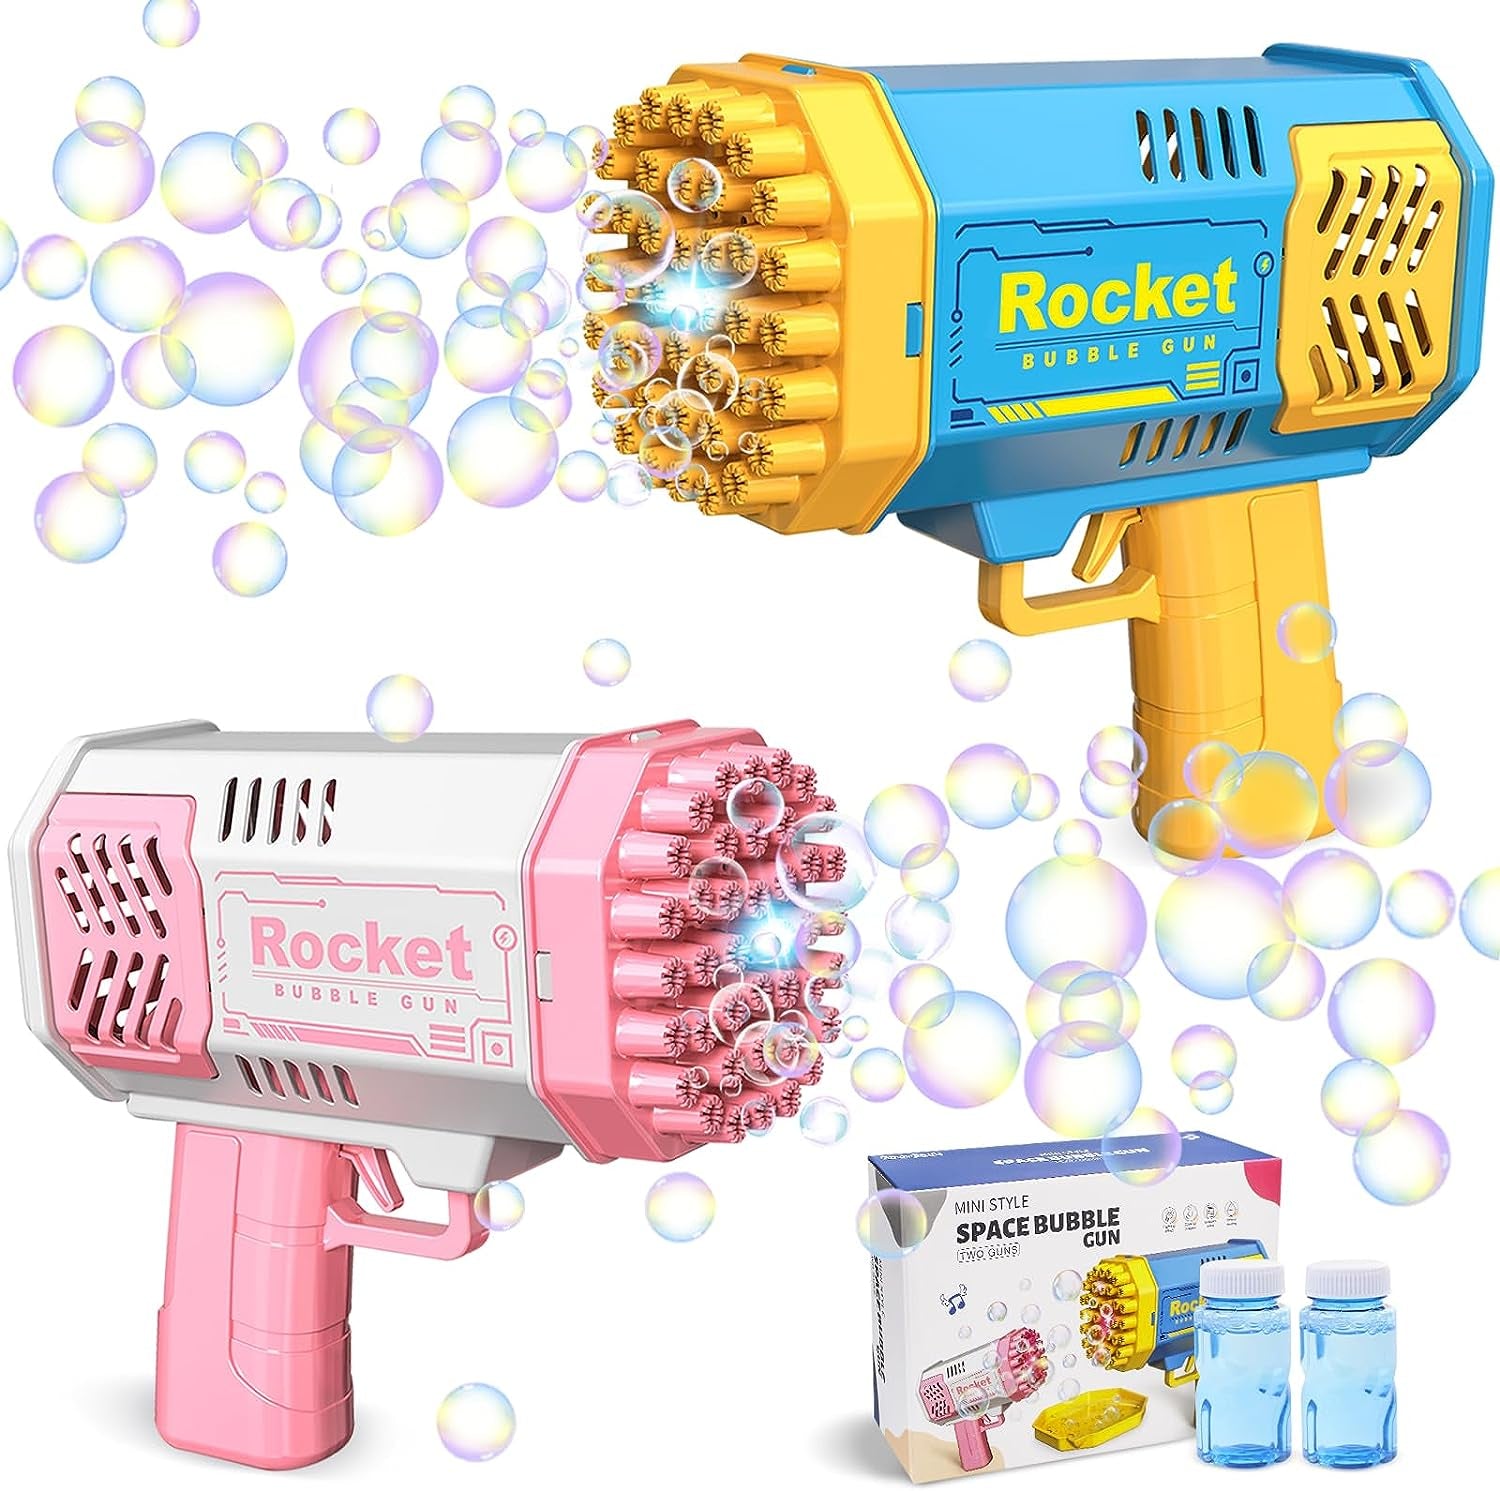 2-Pack 40-Hole Bubble Gun with Flashlight, Rocket Launcher Bubble Machine Bubble Blower Bubble Maker Bazooka Bubble Gun Kids Boys Girls Toy Gifts for Outdoor Indoor Birthday Wedding Party